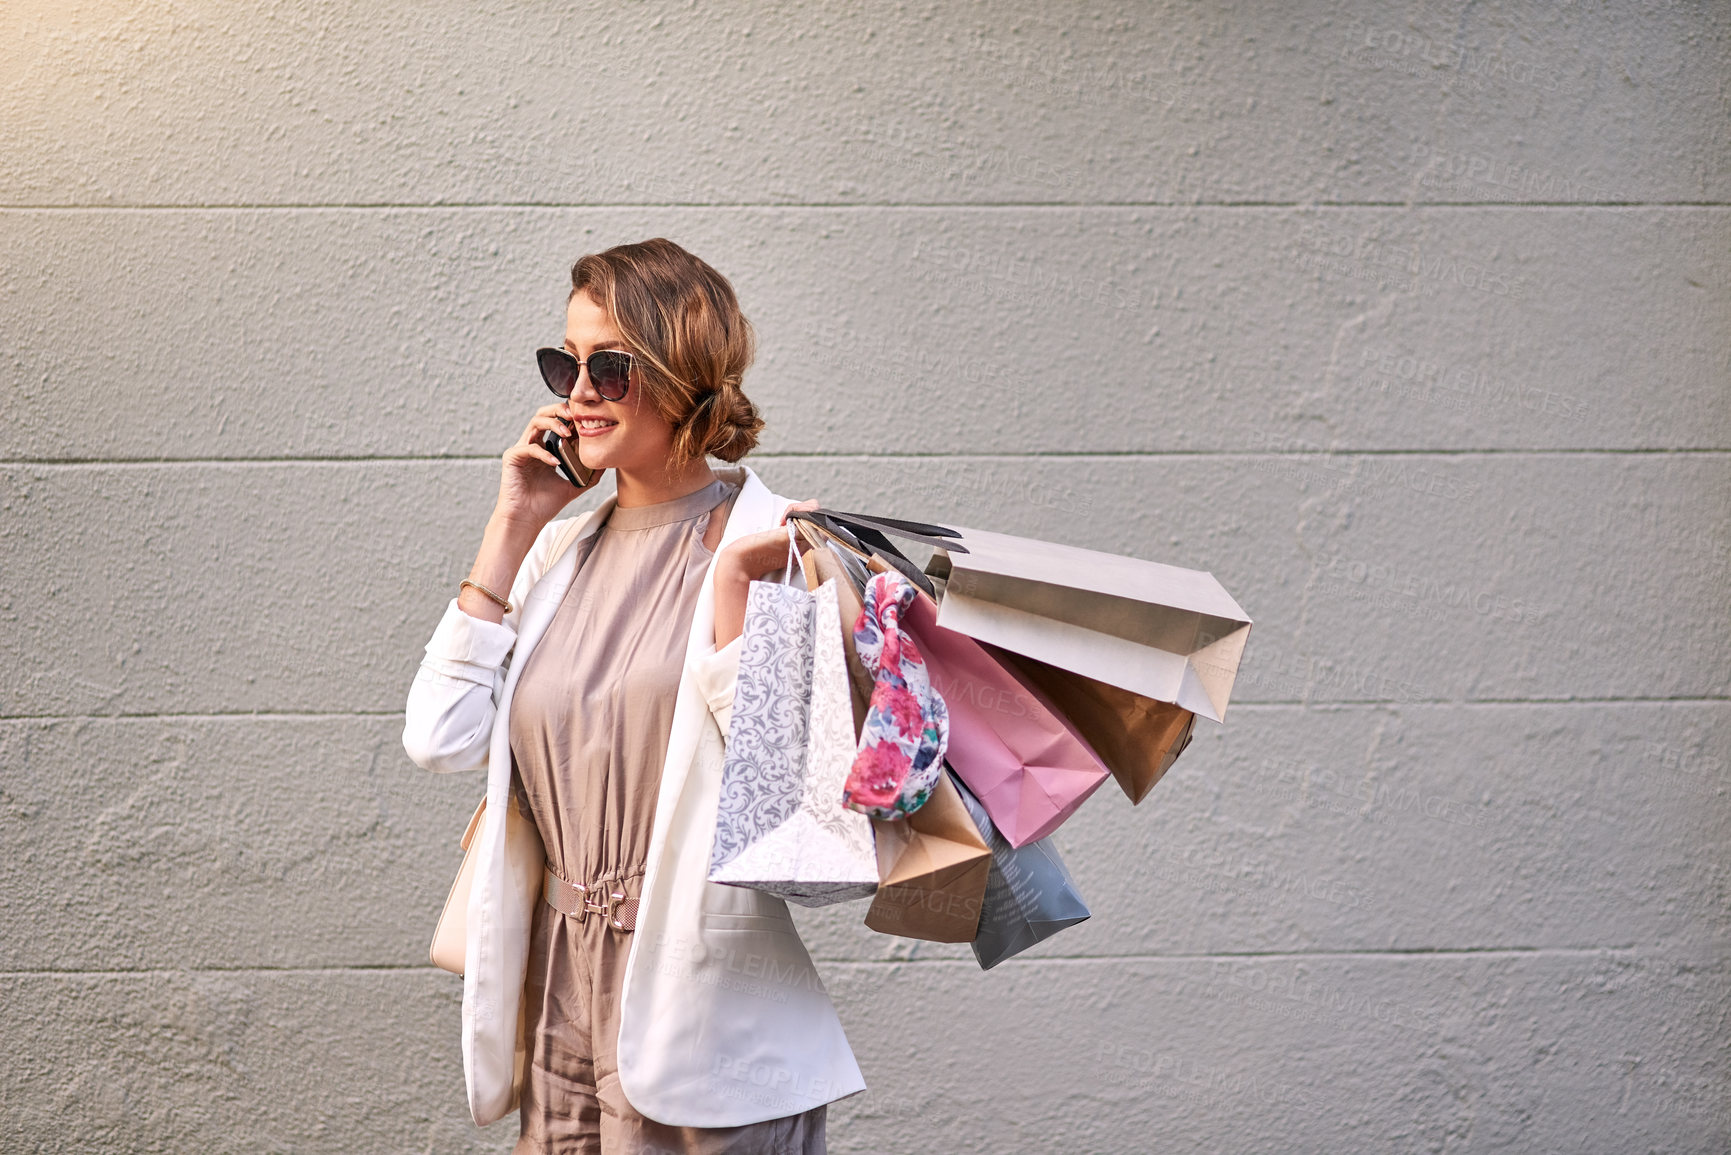 Buy stock photo Trendy woman talking on a phone call after a shopping spree in the city. Young female looking stylish, enjoying her free time with retail therapy downtown, smiling and happy about a sale and purchase